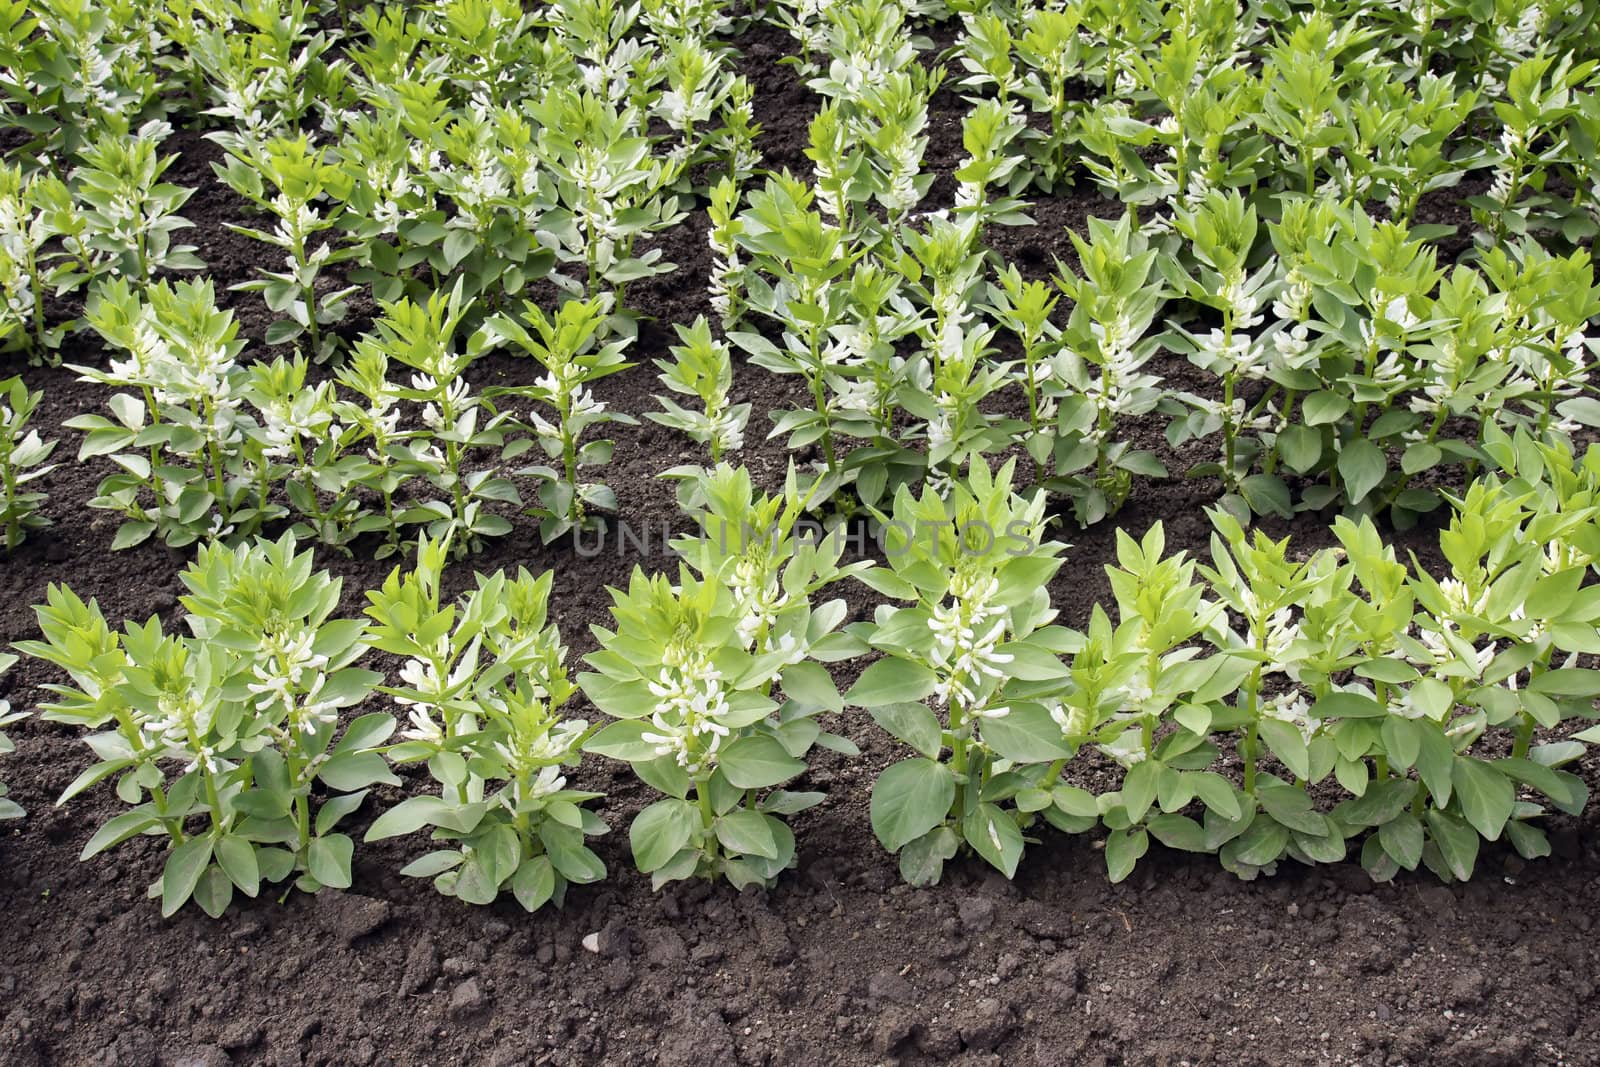 Agriculture background: cultivated field or garden of fava or broad bean (Vicia faba) with rows of the white bloom plant.